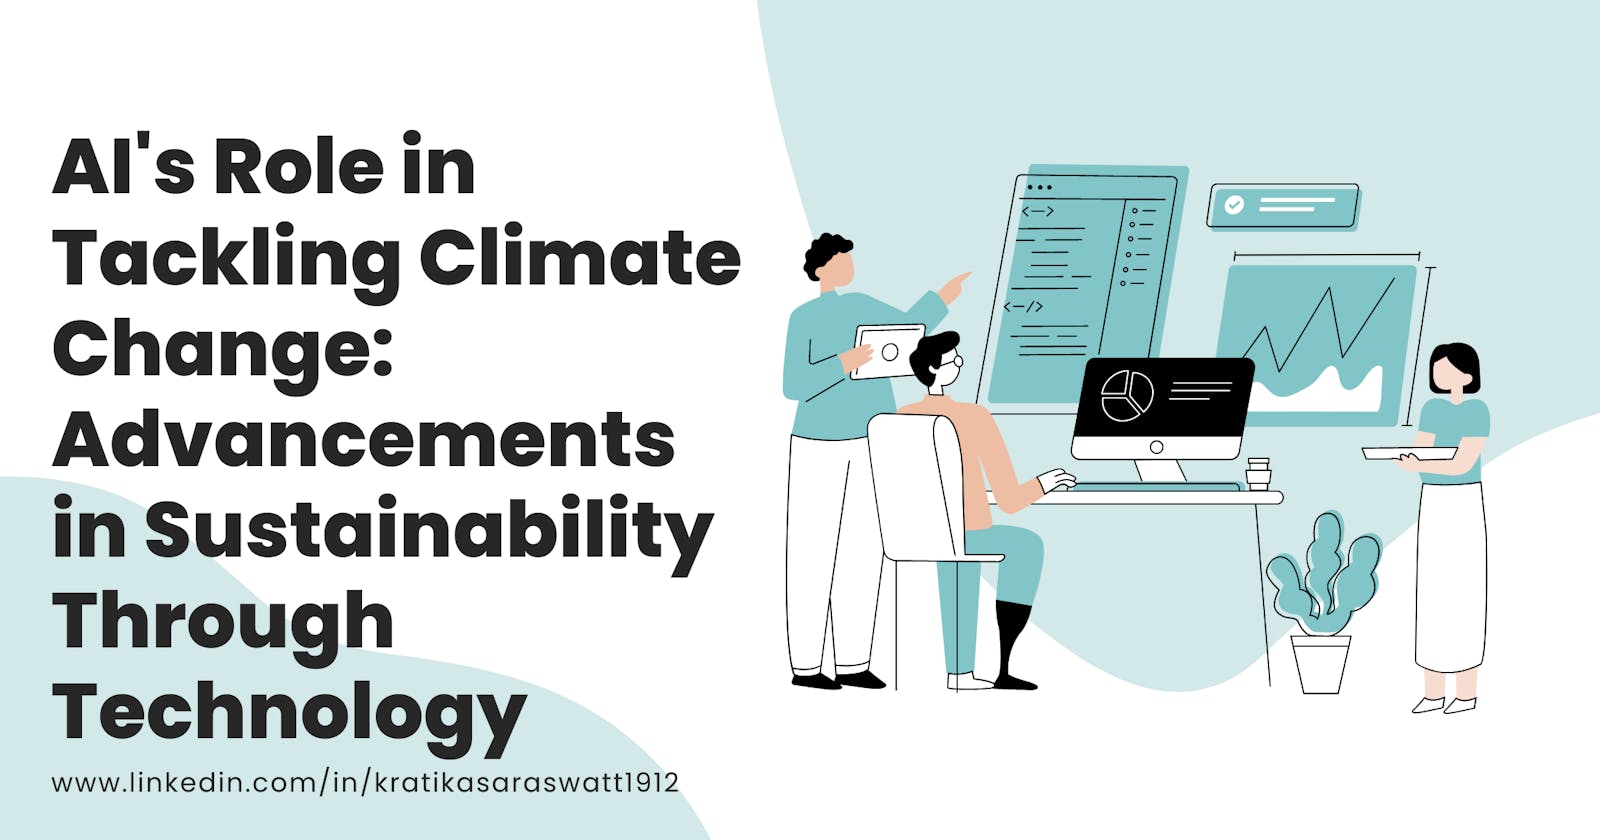 AI's Role in Tackling Climate Change: Advancements in Sustainability Through Technology